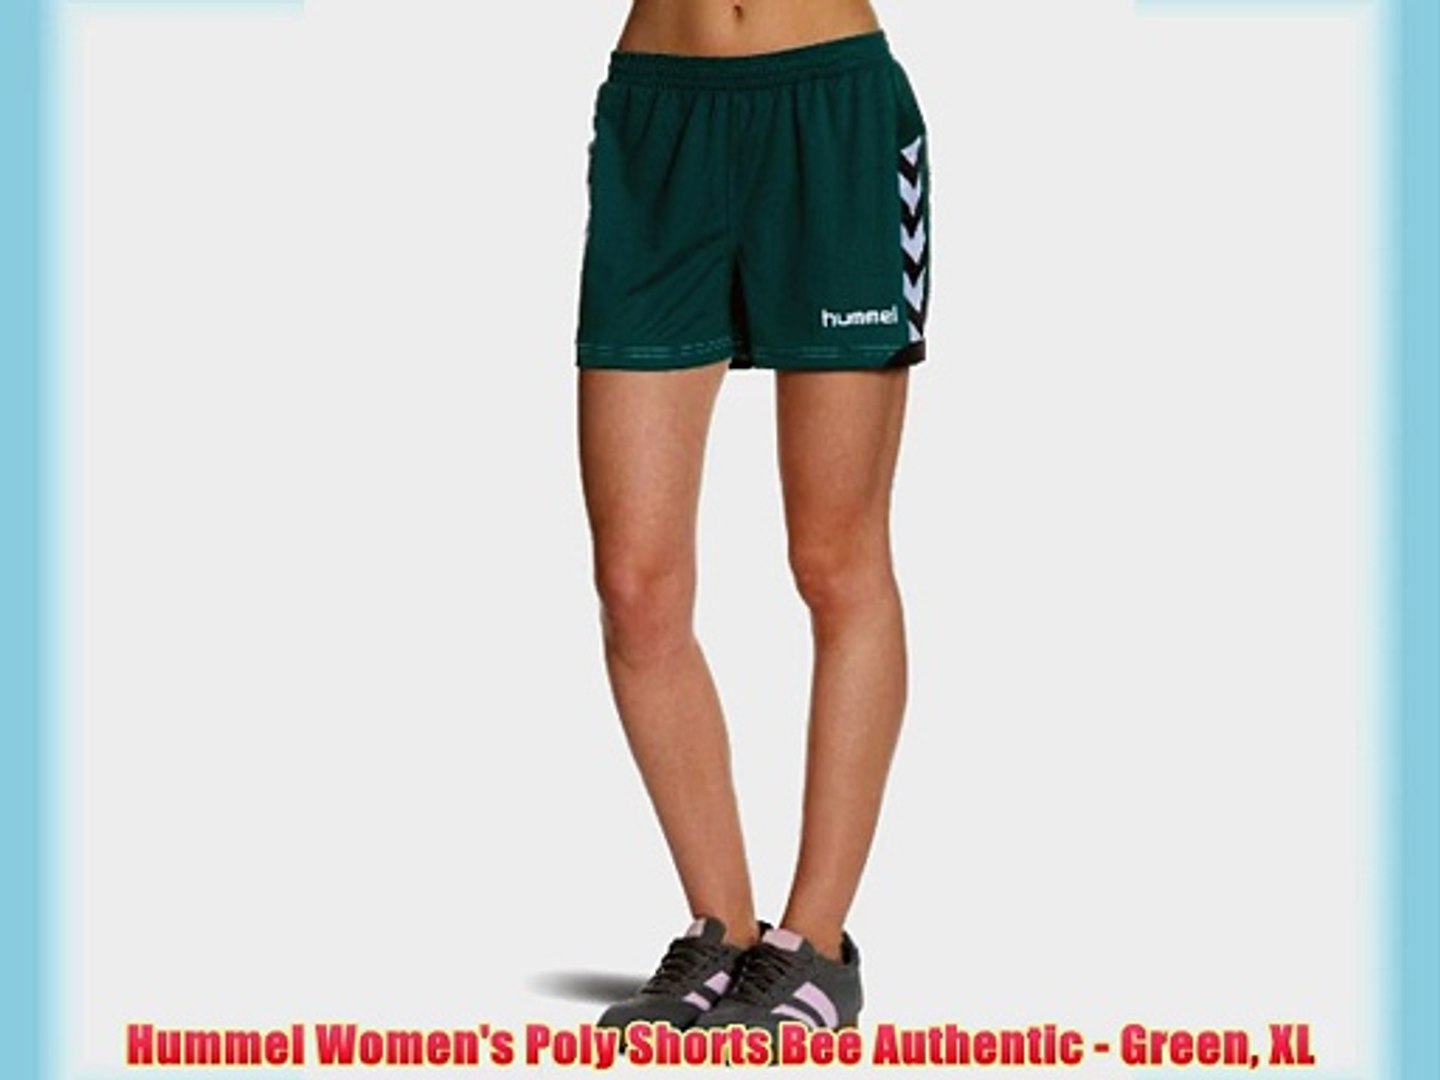 Hummel Women's Poly Shorts Bee Authentic - Green XL - video Dailymotion